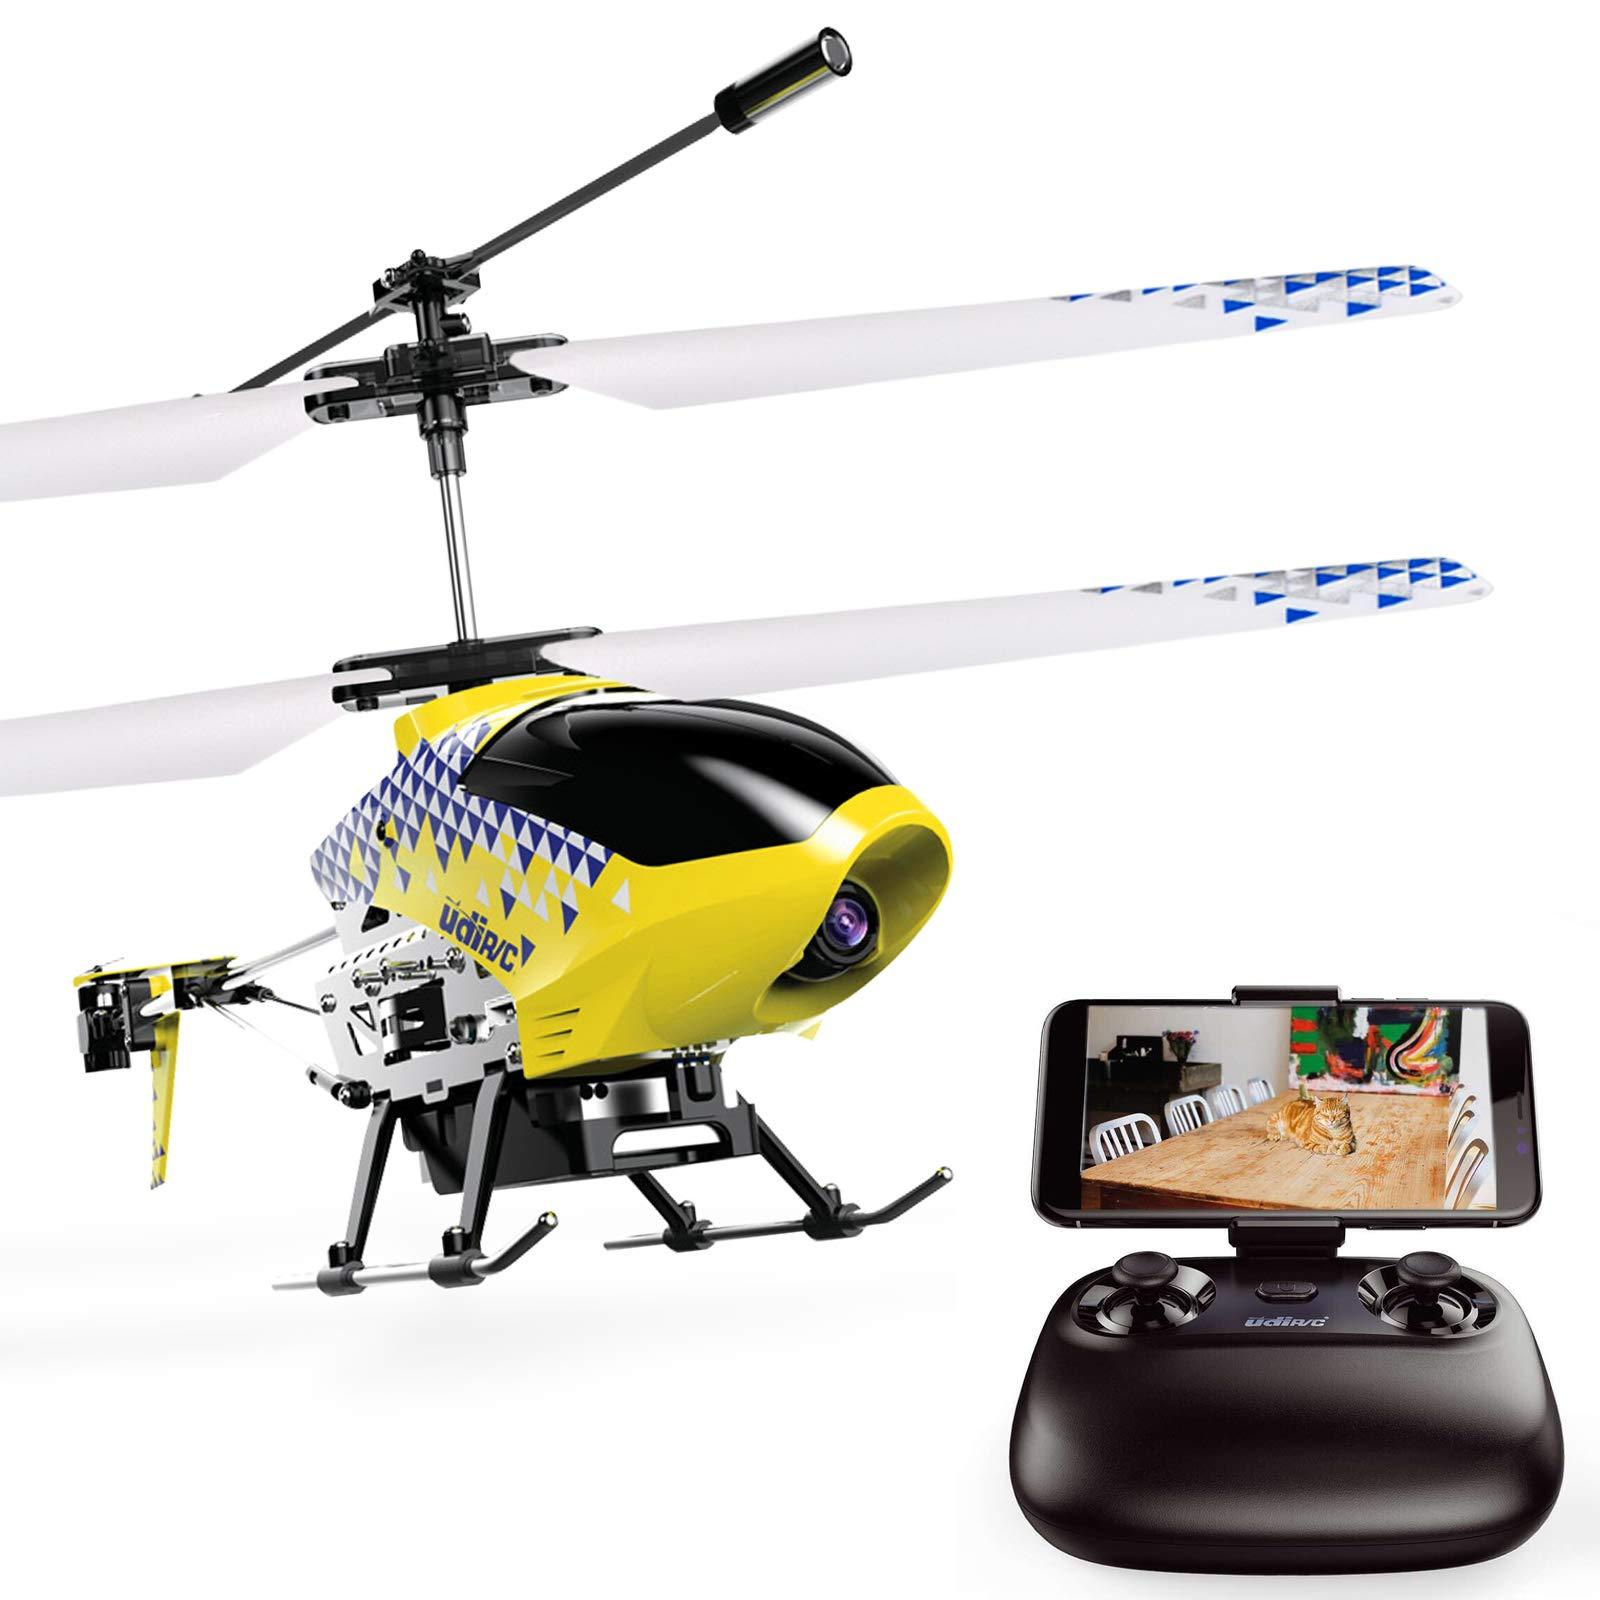 Remote Flying Helicopter: Benefits of Owning and Flying a Remote Flying Helicopter